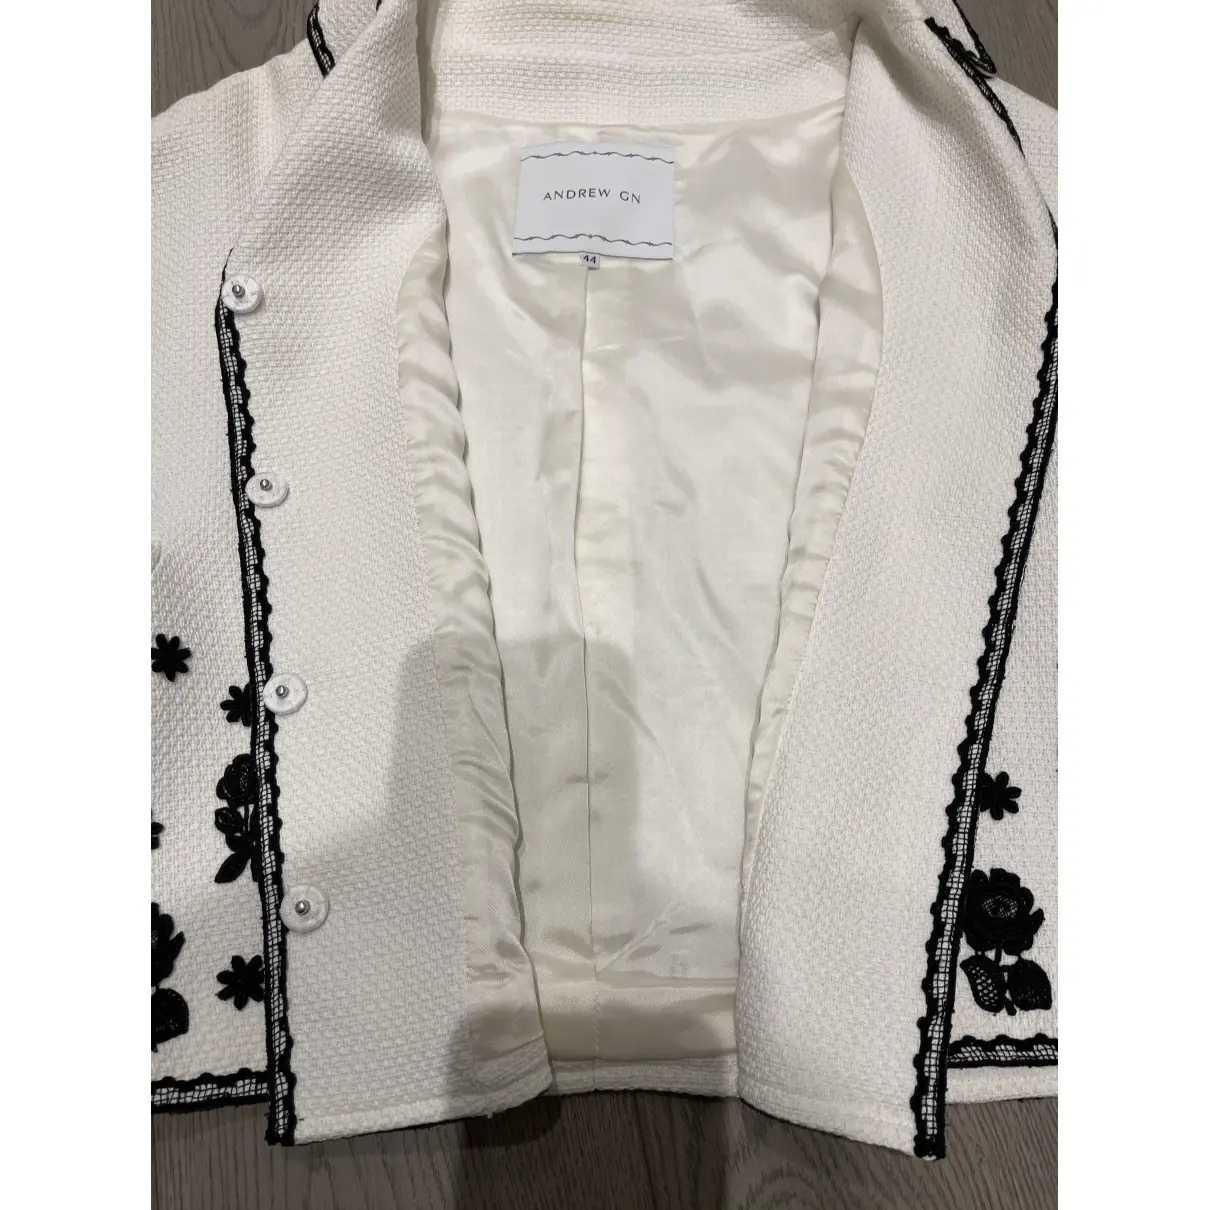 Jacket Andrew Gn